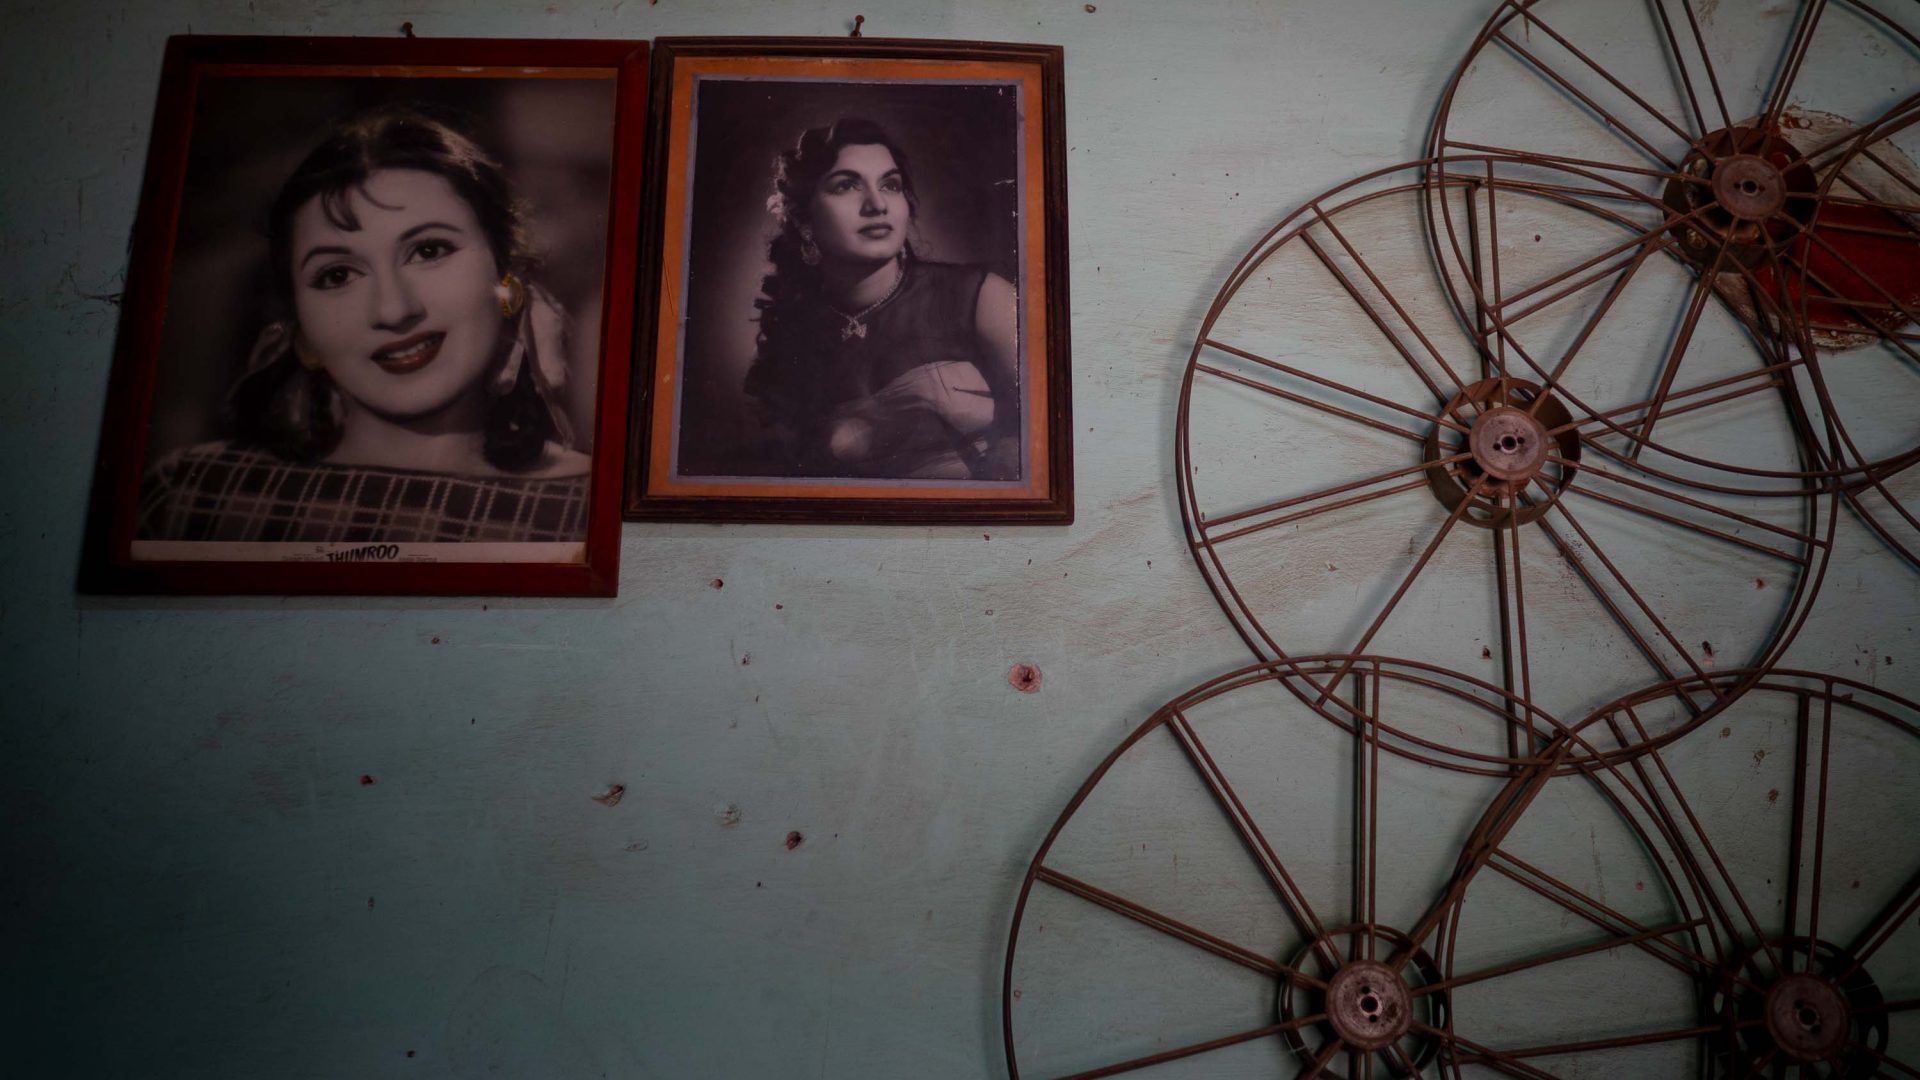 Photos of female film stars are on the wall alongside film reels.